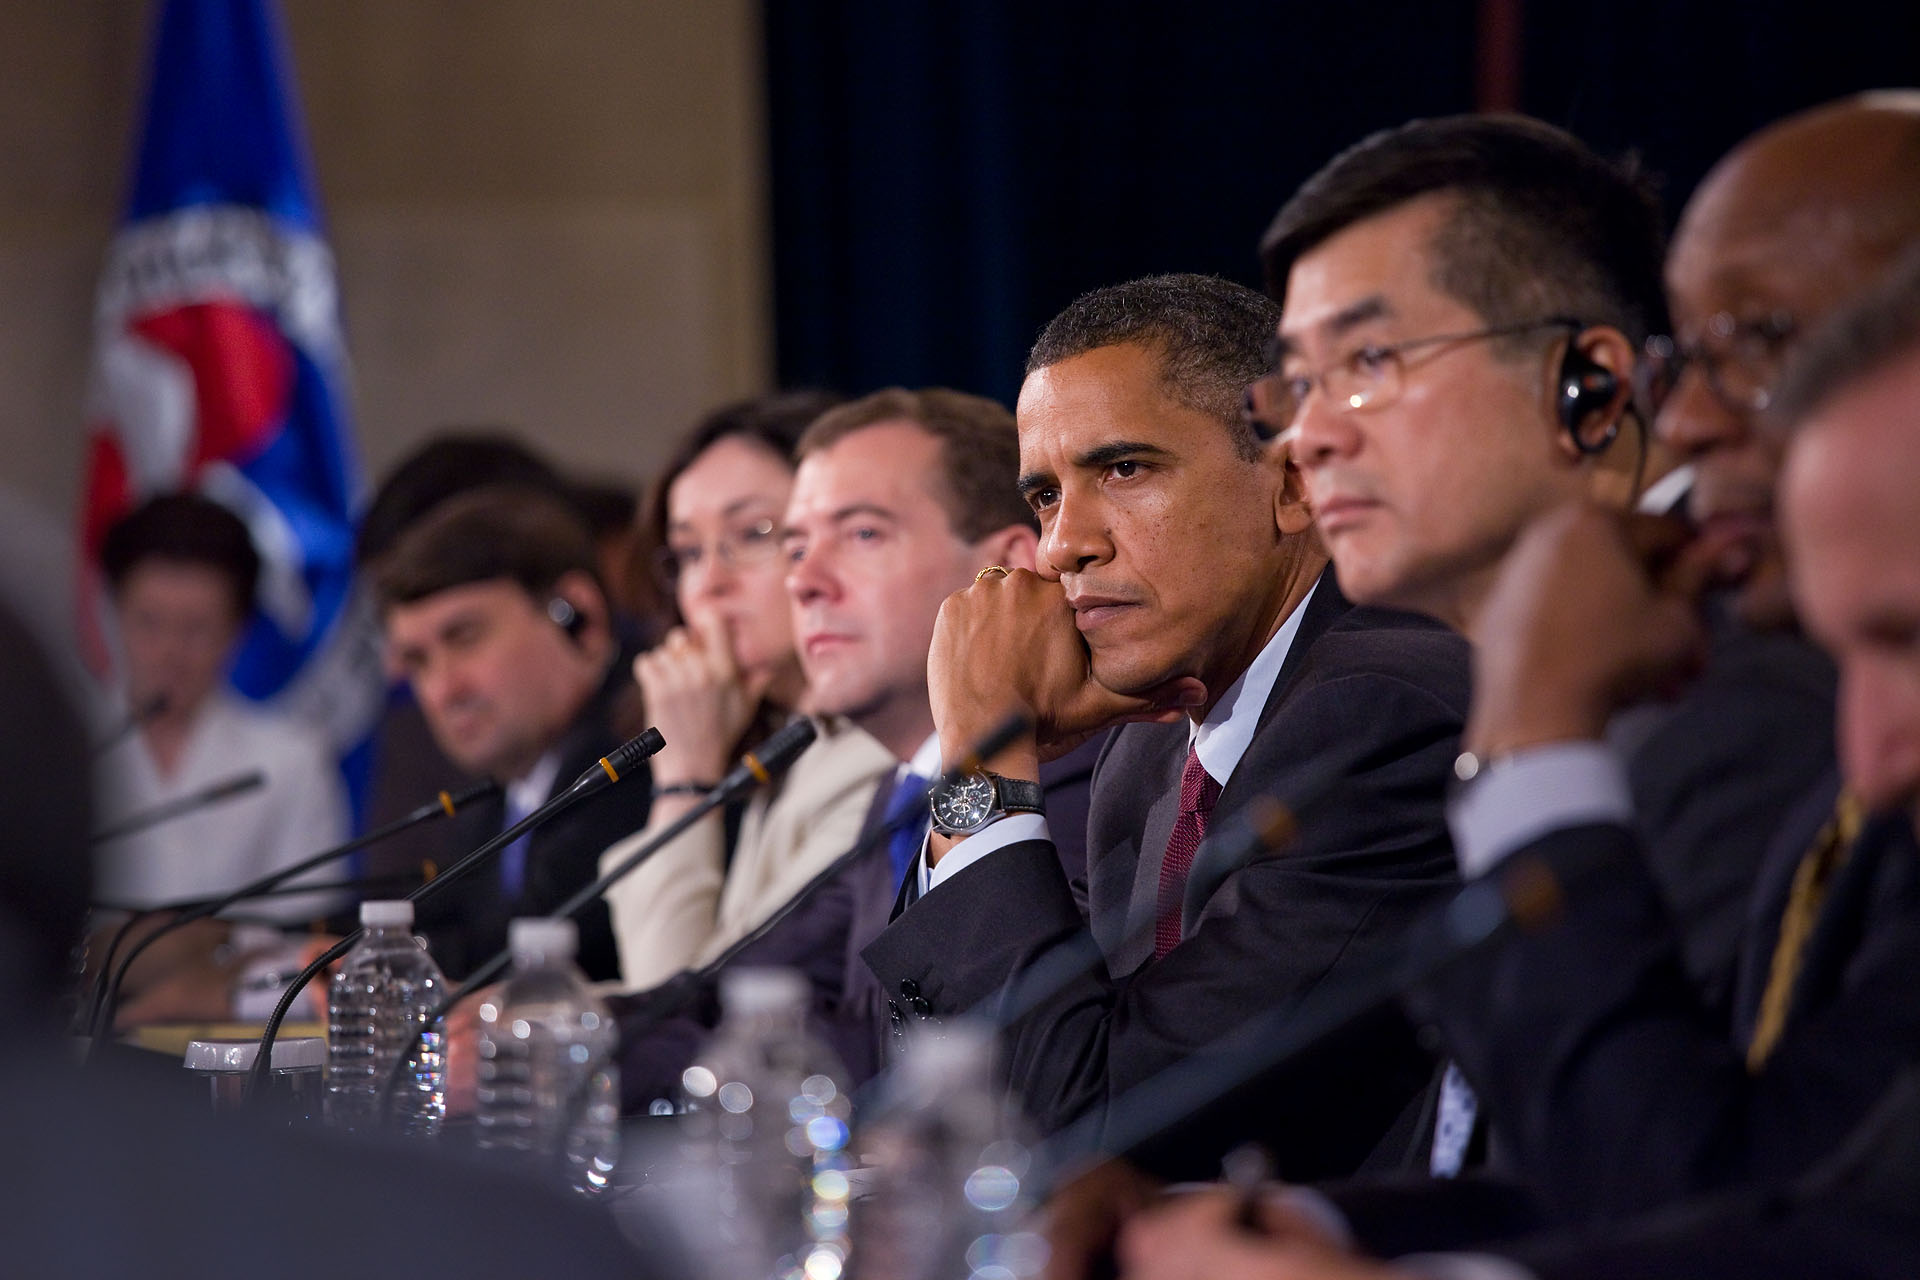 President Barack Obama and President Dmitry Medvedev of Russia at the U.S.–Russia Business Summit